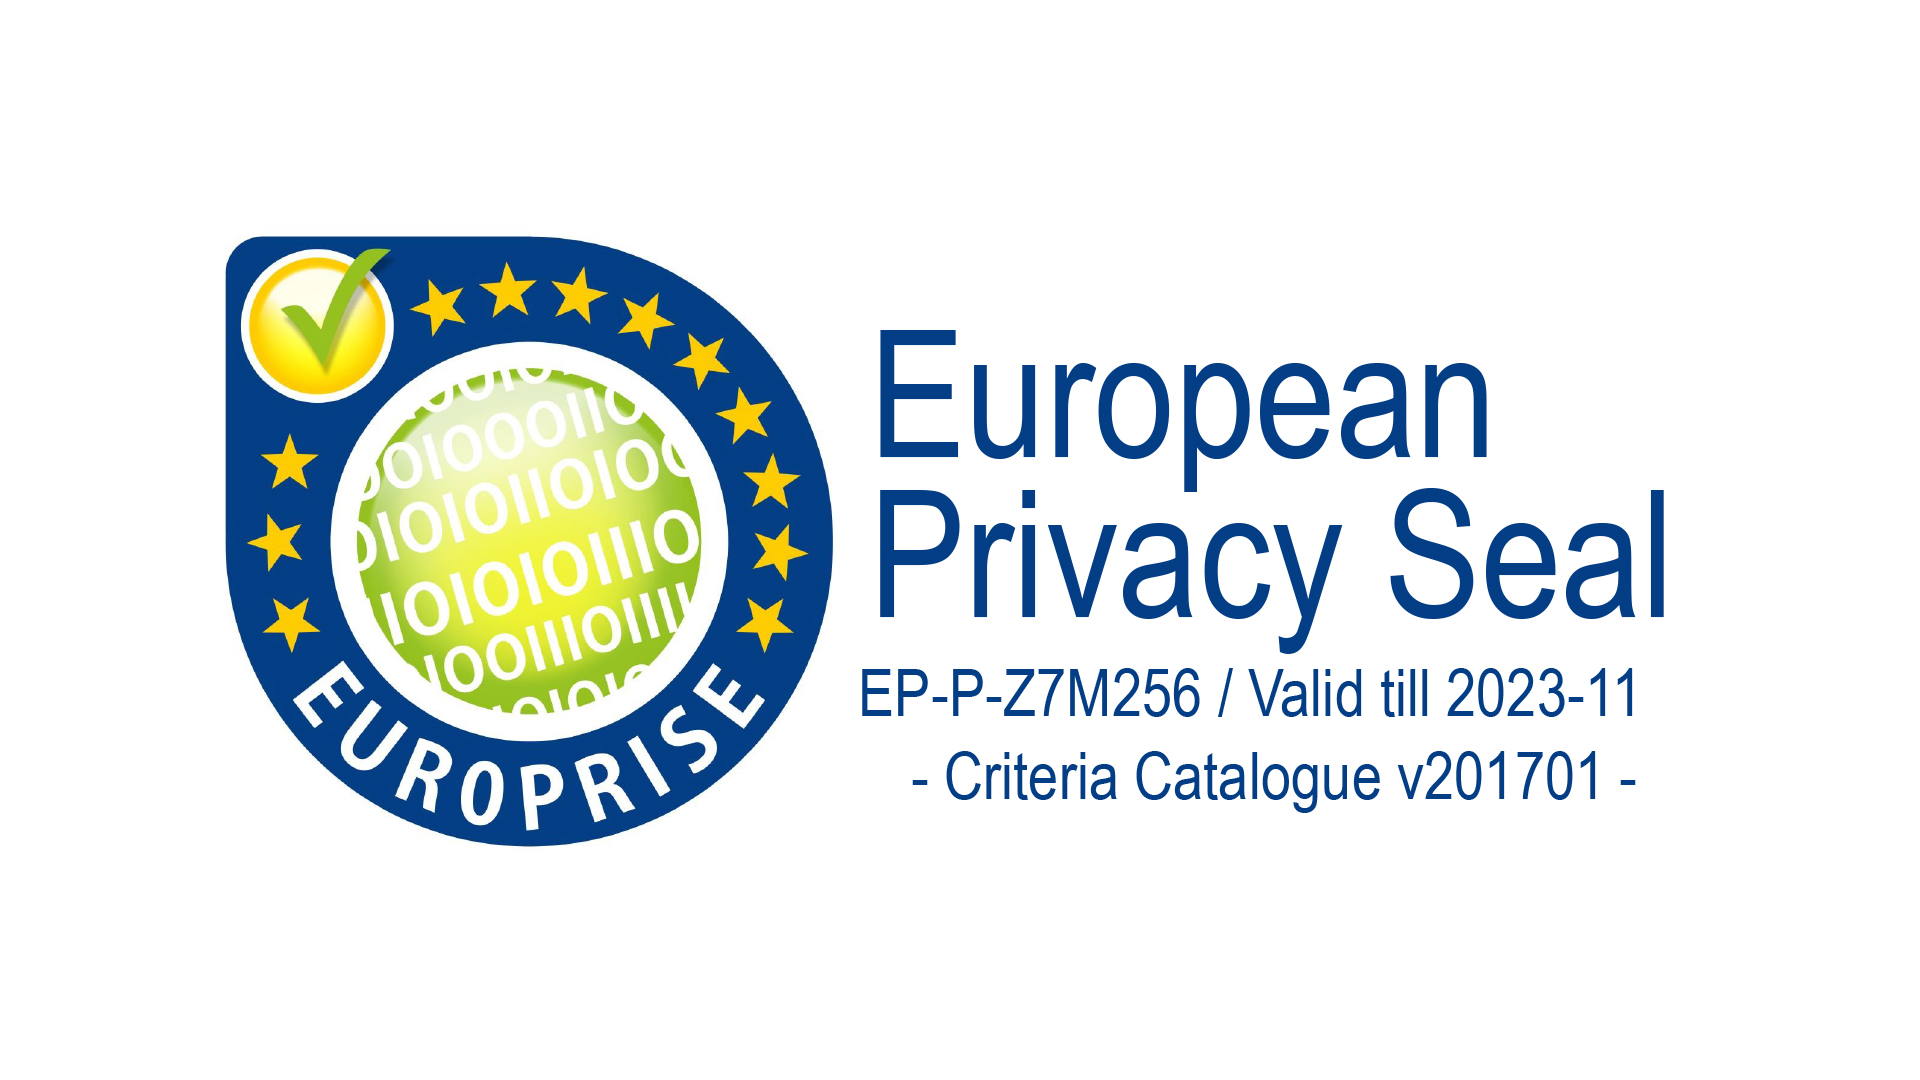 The Europrise certification